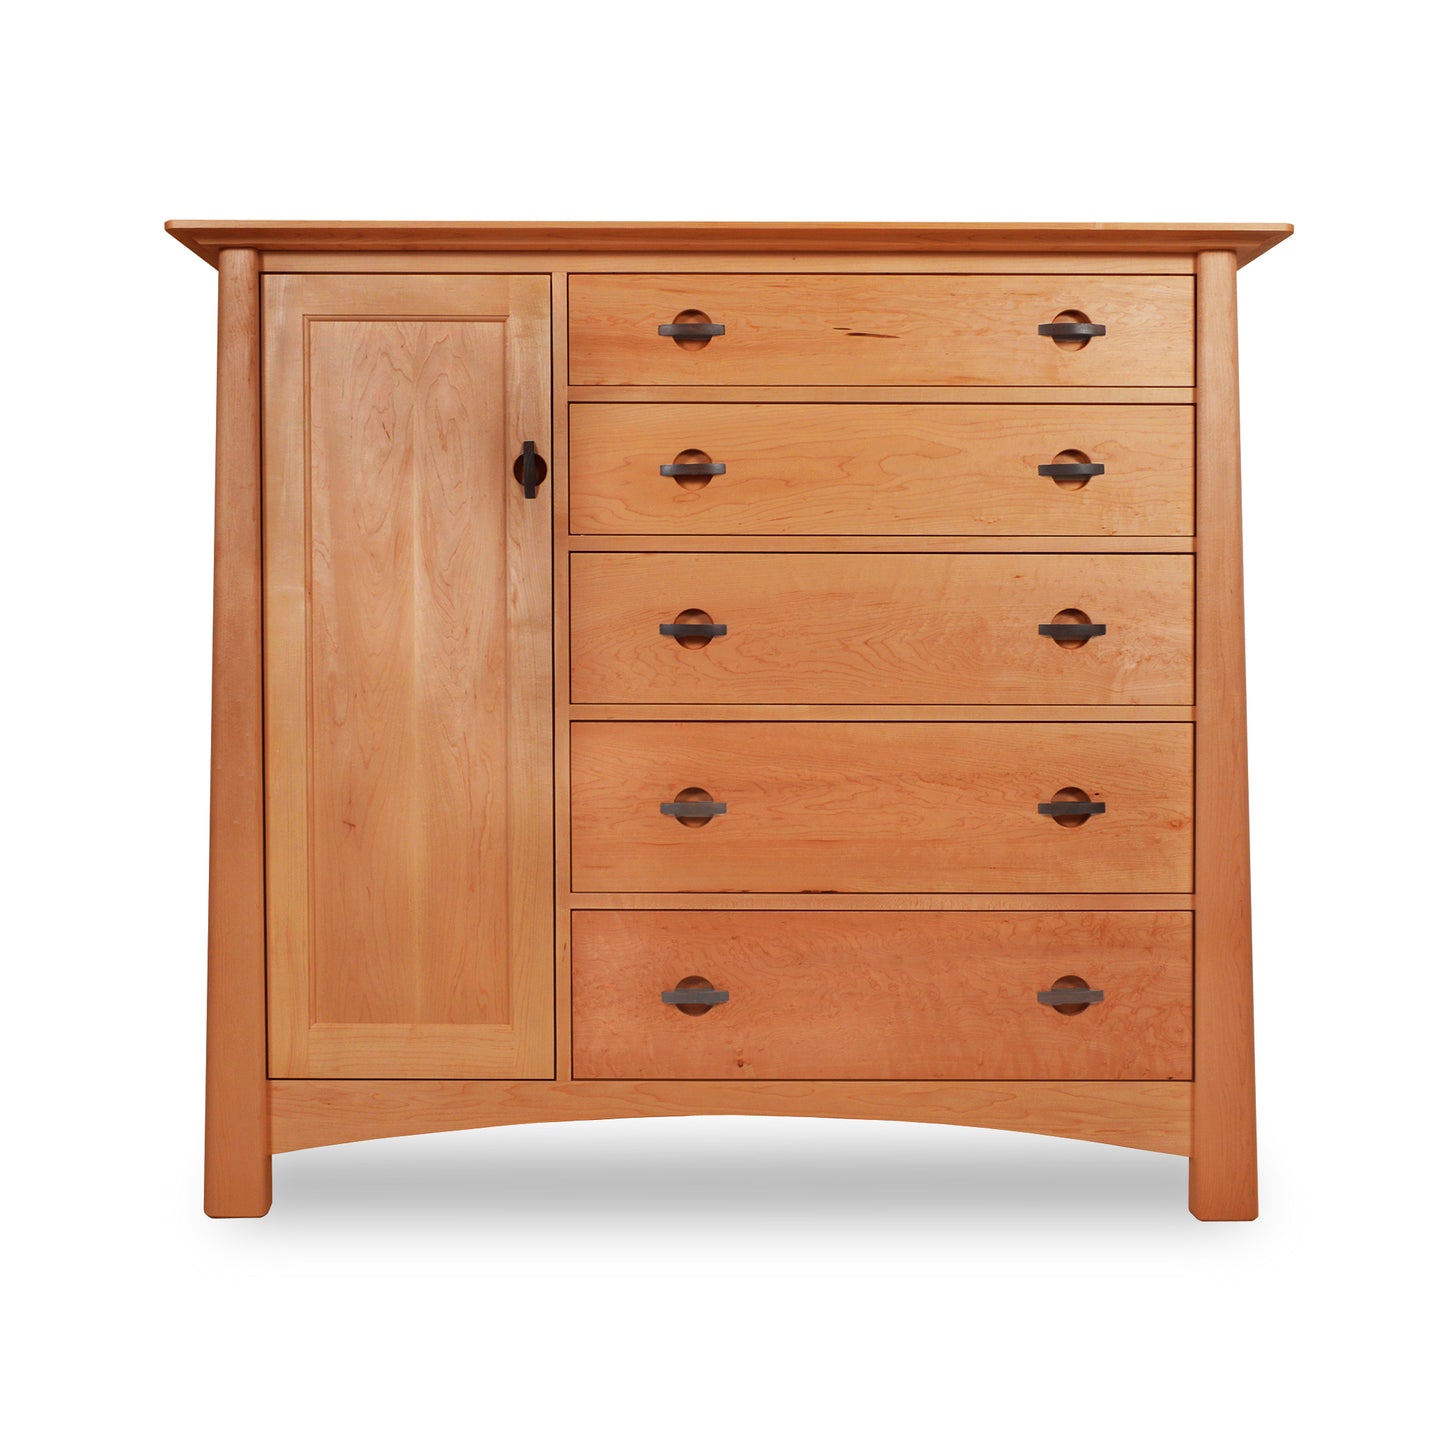 A Solid Wood Maple Corner Woodworks Cherry Moon Gent's Chest with a cabinet door on one side, isolated on a white background.